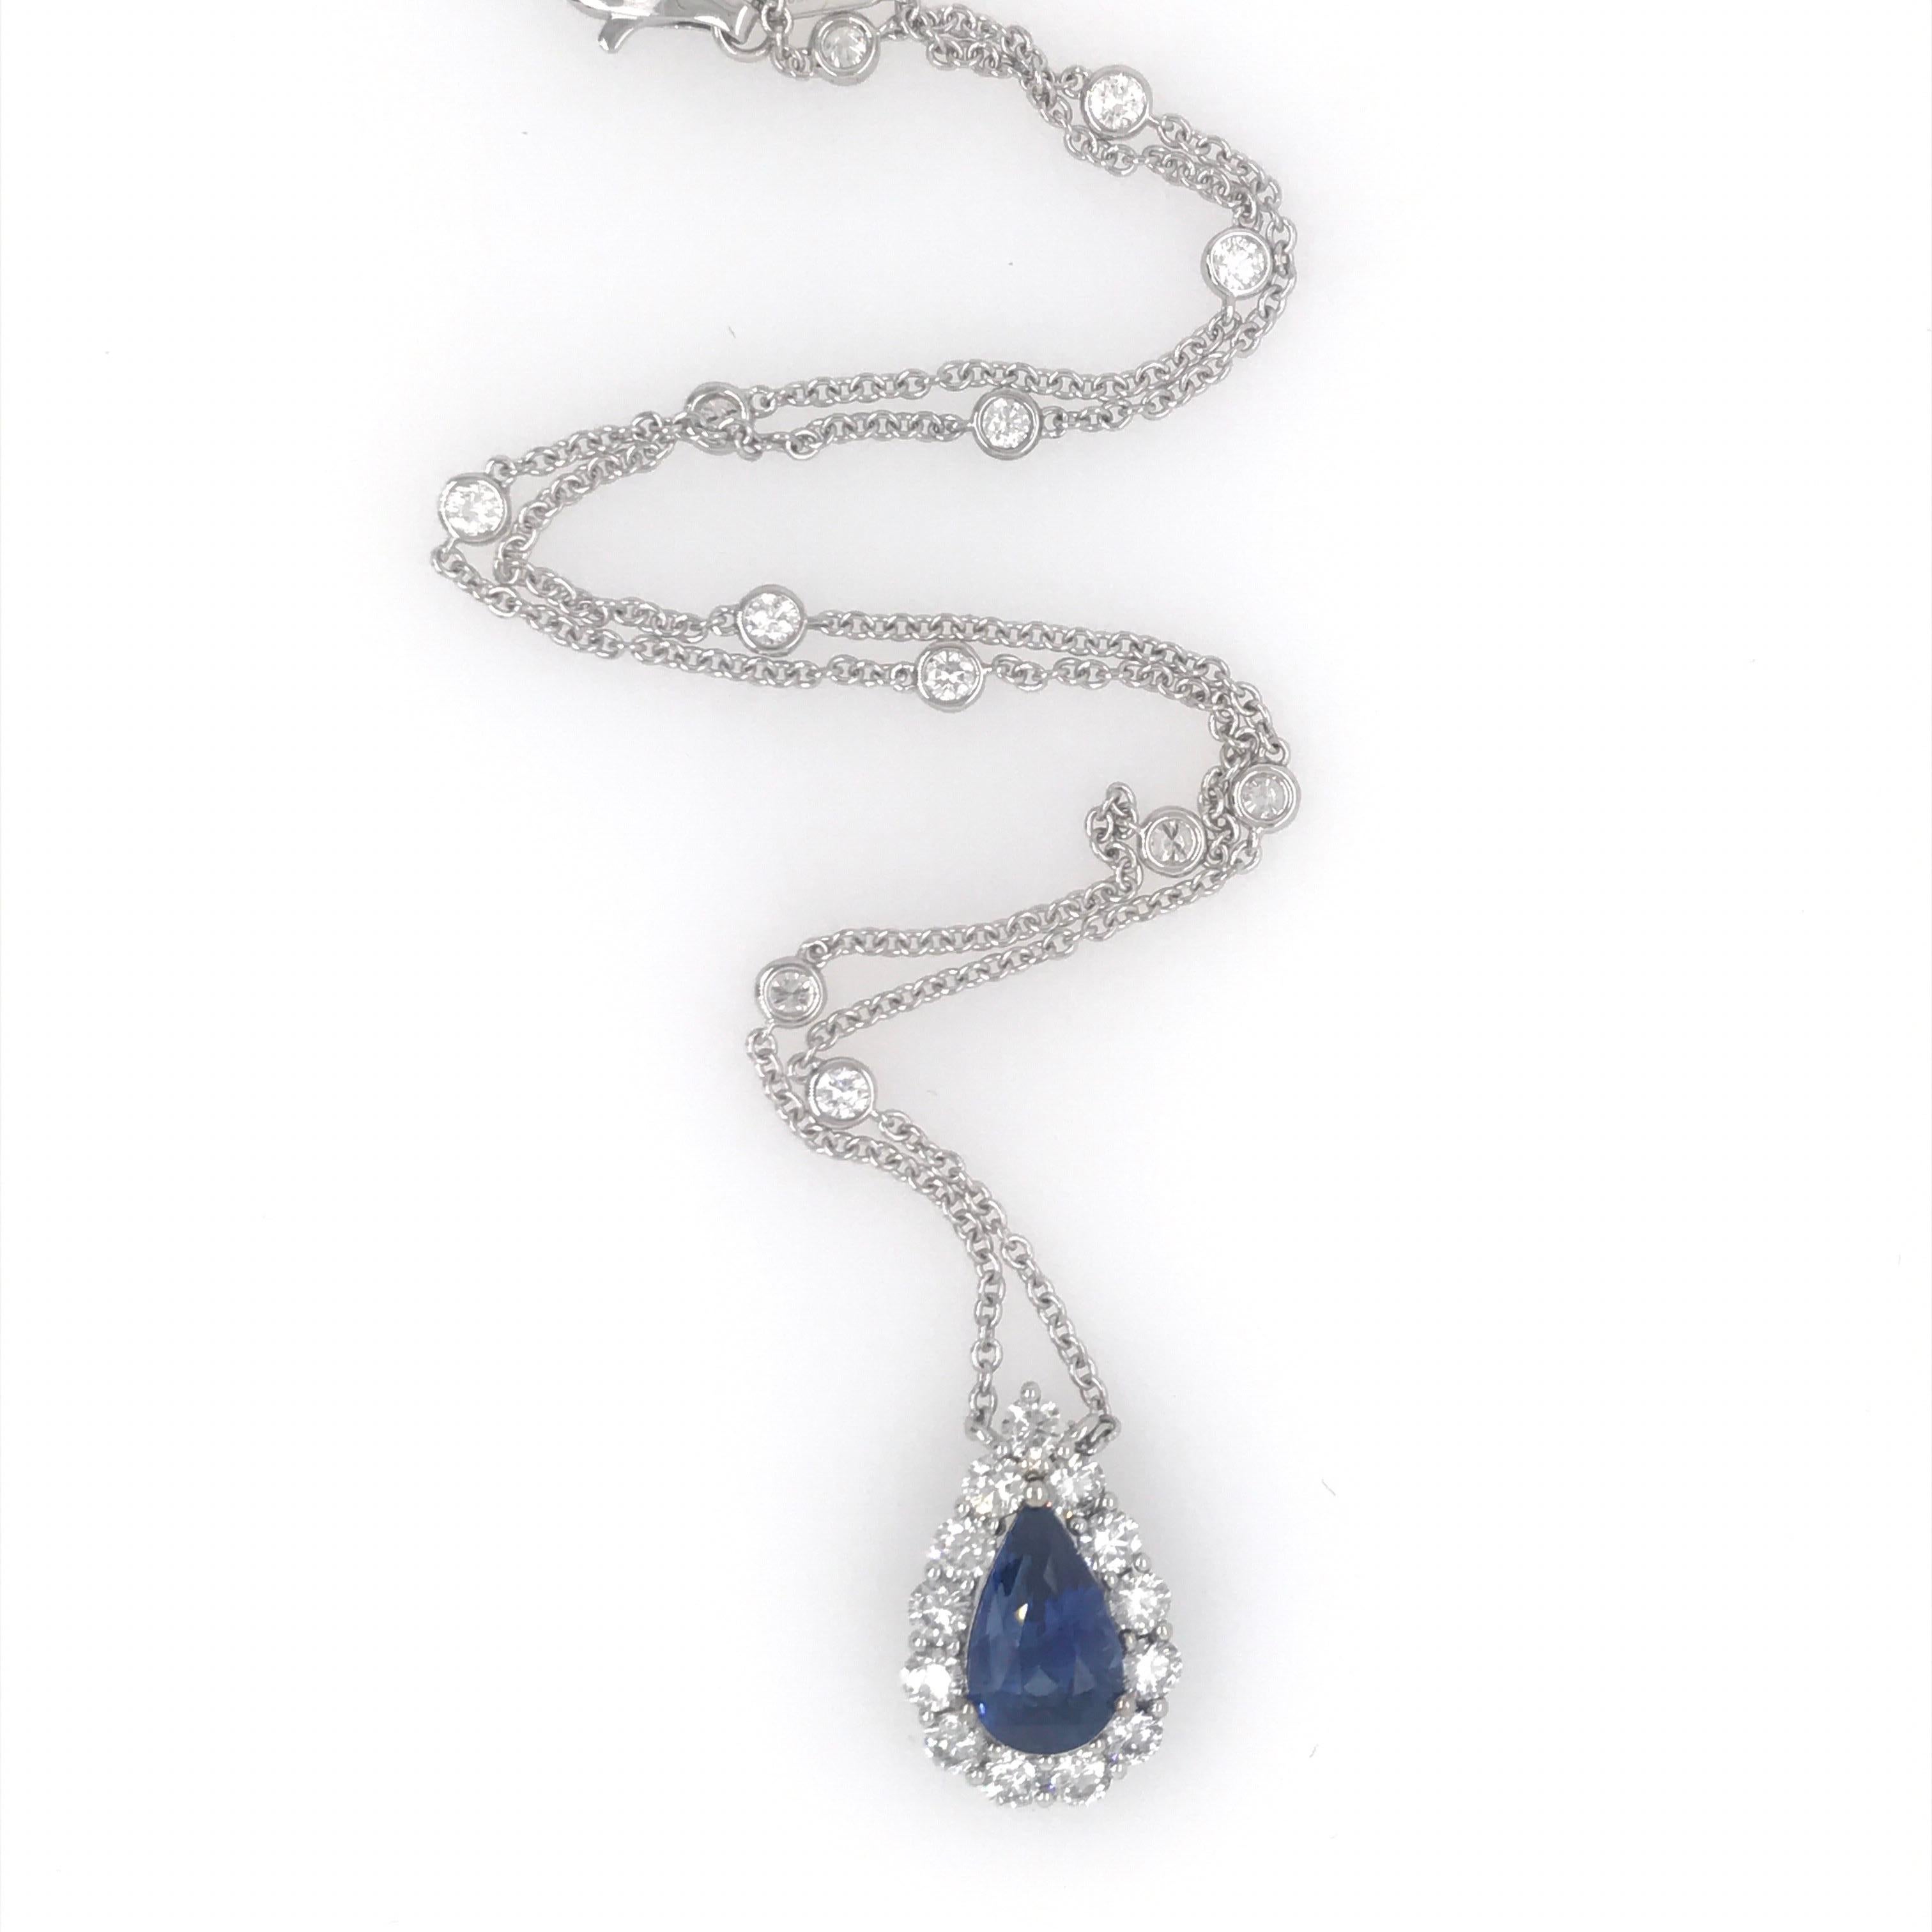 18K White gold necklace featuring one blue pear shape sapphire weighing 4.07 carats flanked with 13 round brilliants weighing 1.35 carats on a diamond by the yard weighing 0.69 carats.
Color G-H